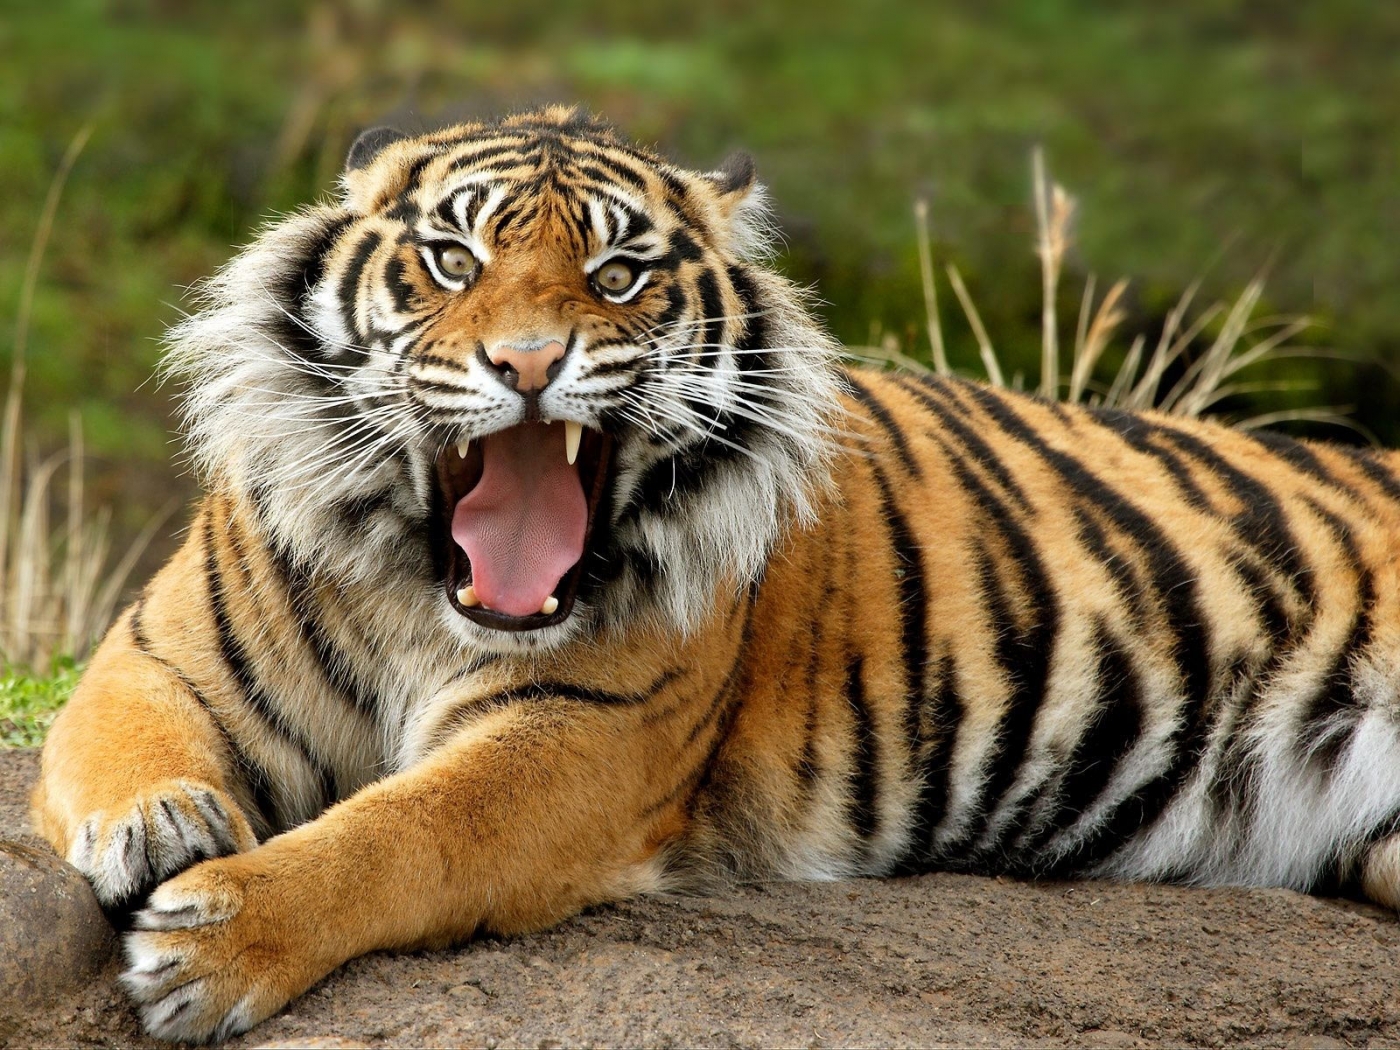 tigers, animals images